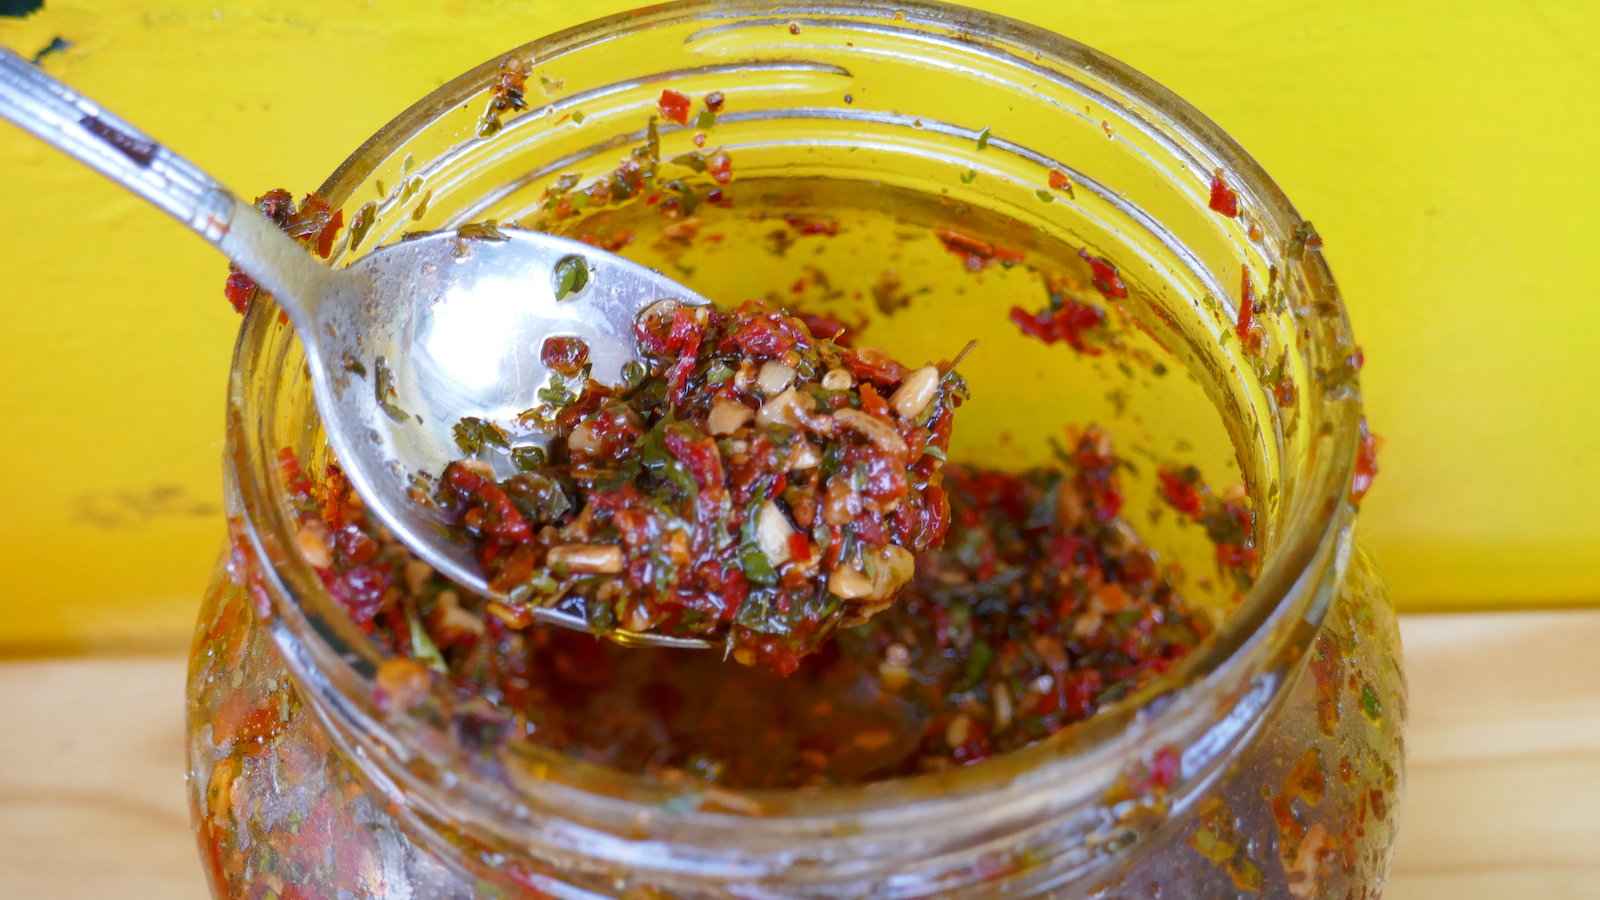 Chimichurri is an Argentinean type of salsa that's excellent with red meat